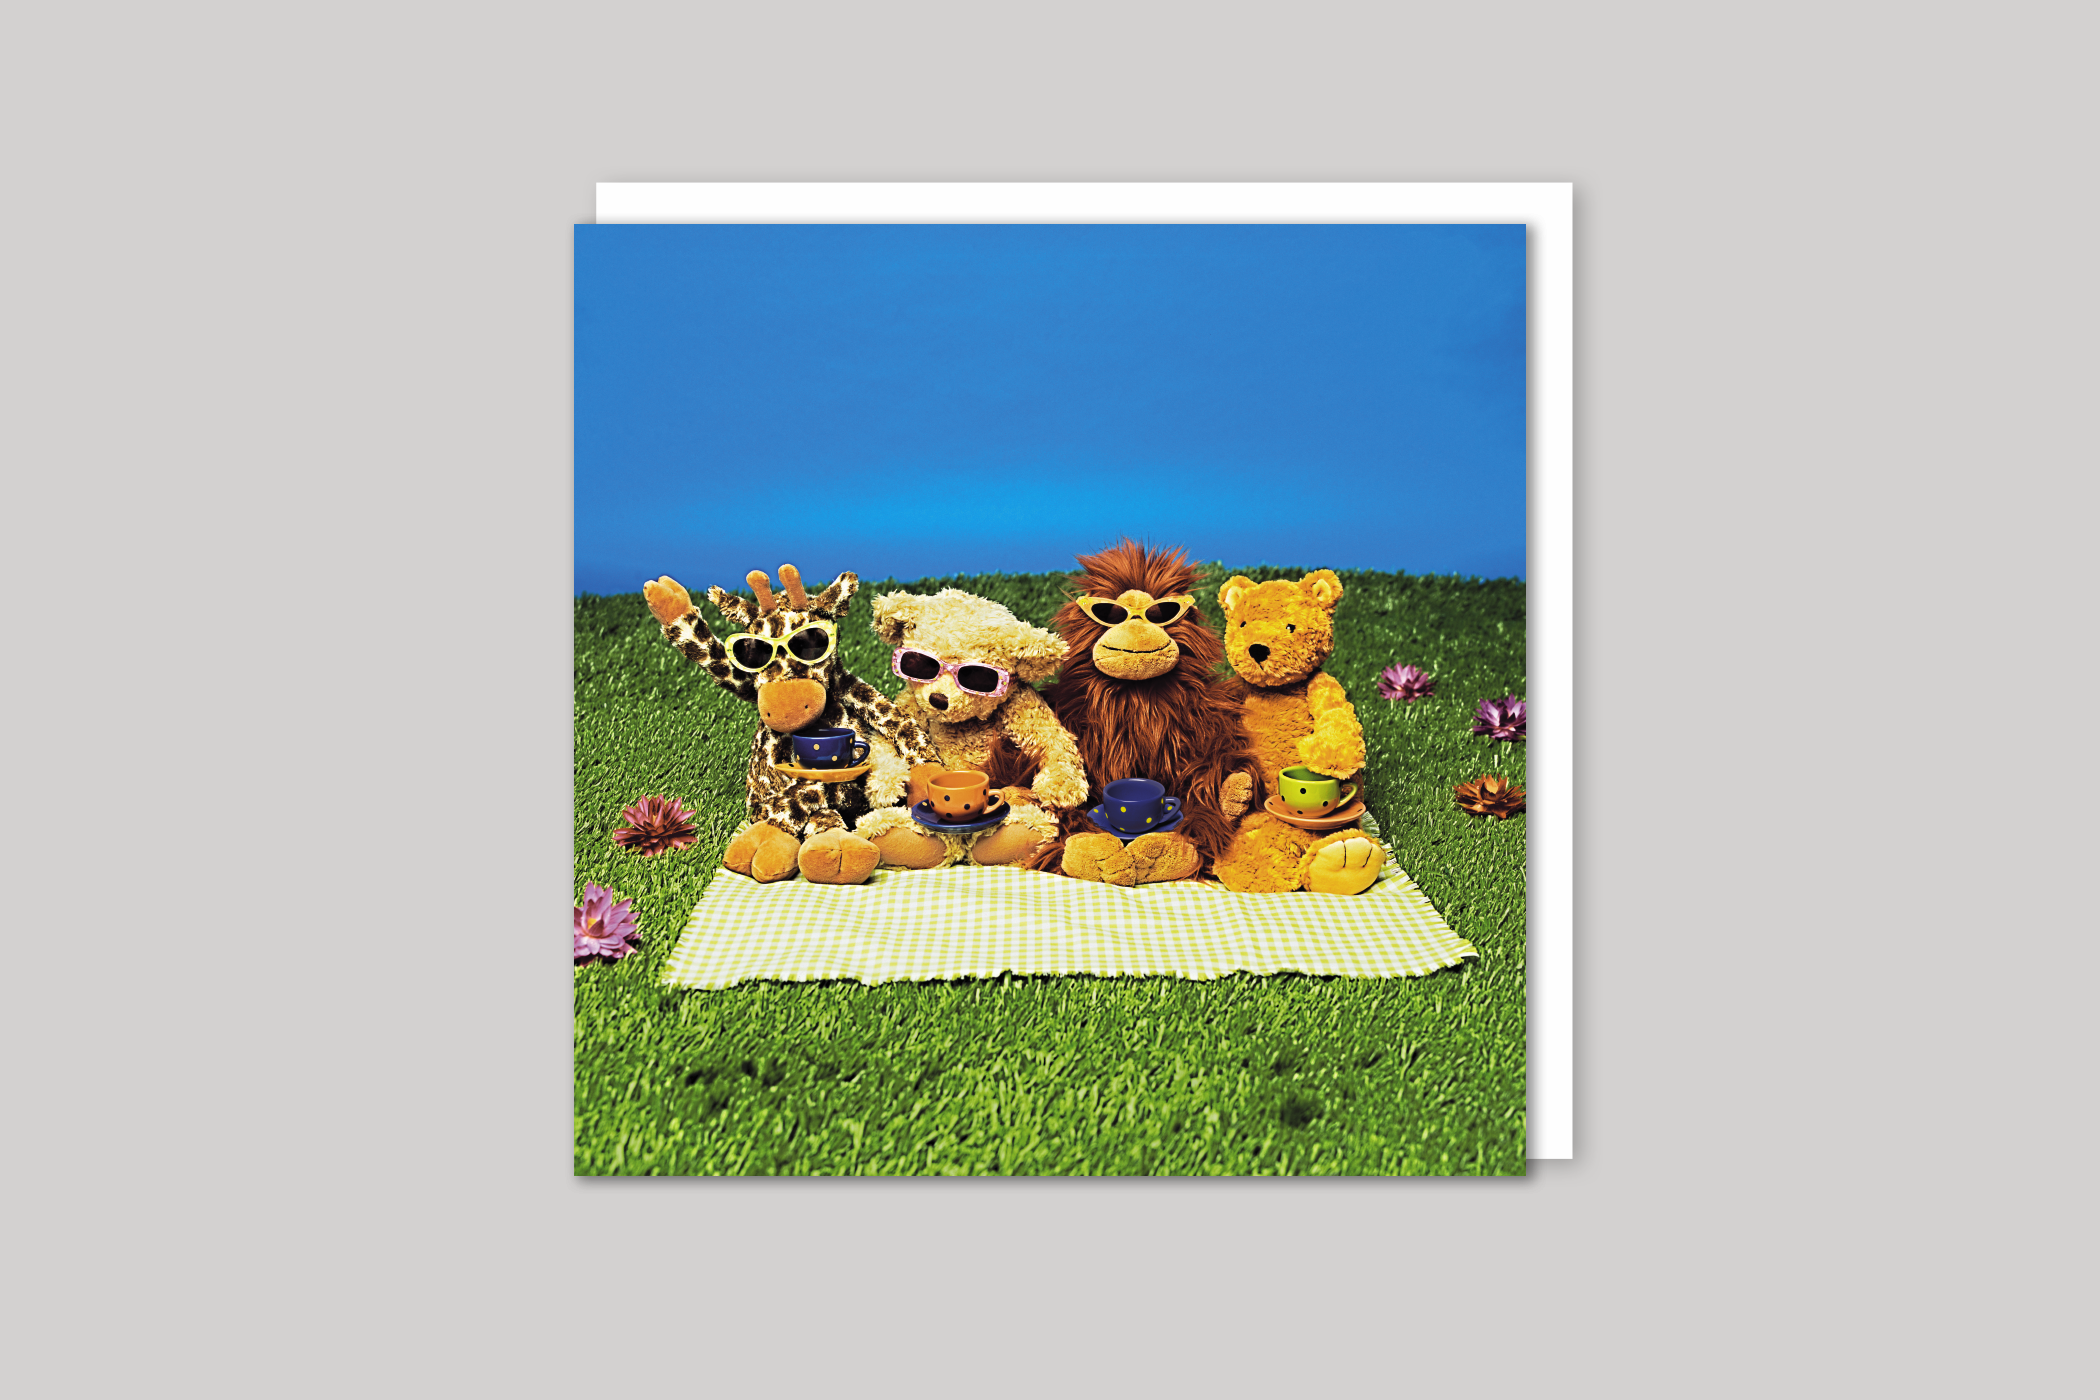 Teddy Bear's Picnic from Exposure range of photographic cards by Icon, back page.